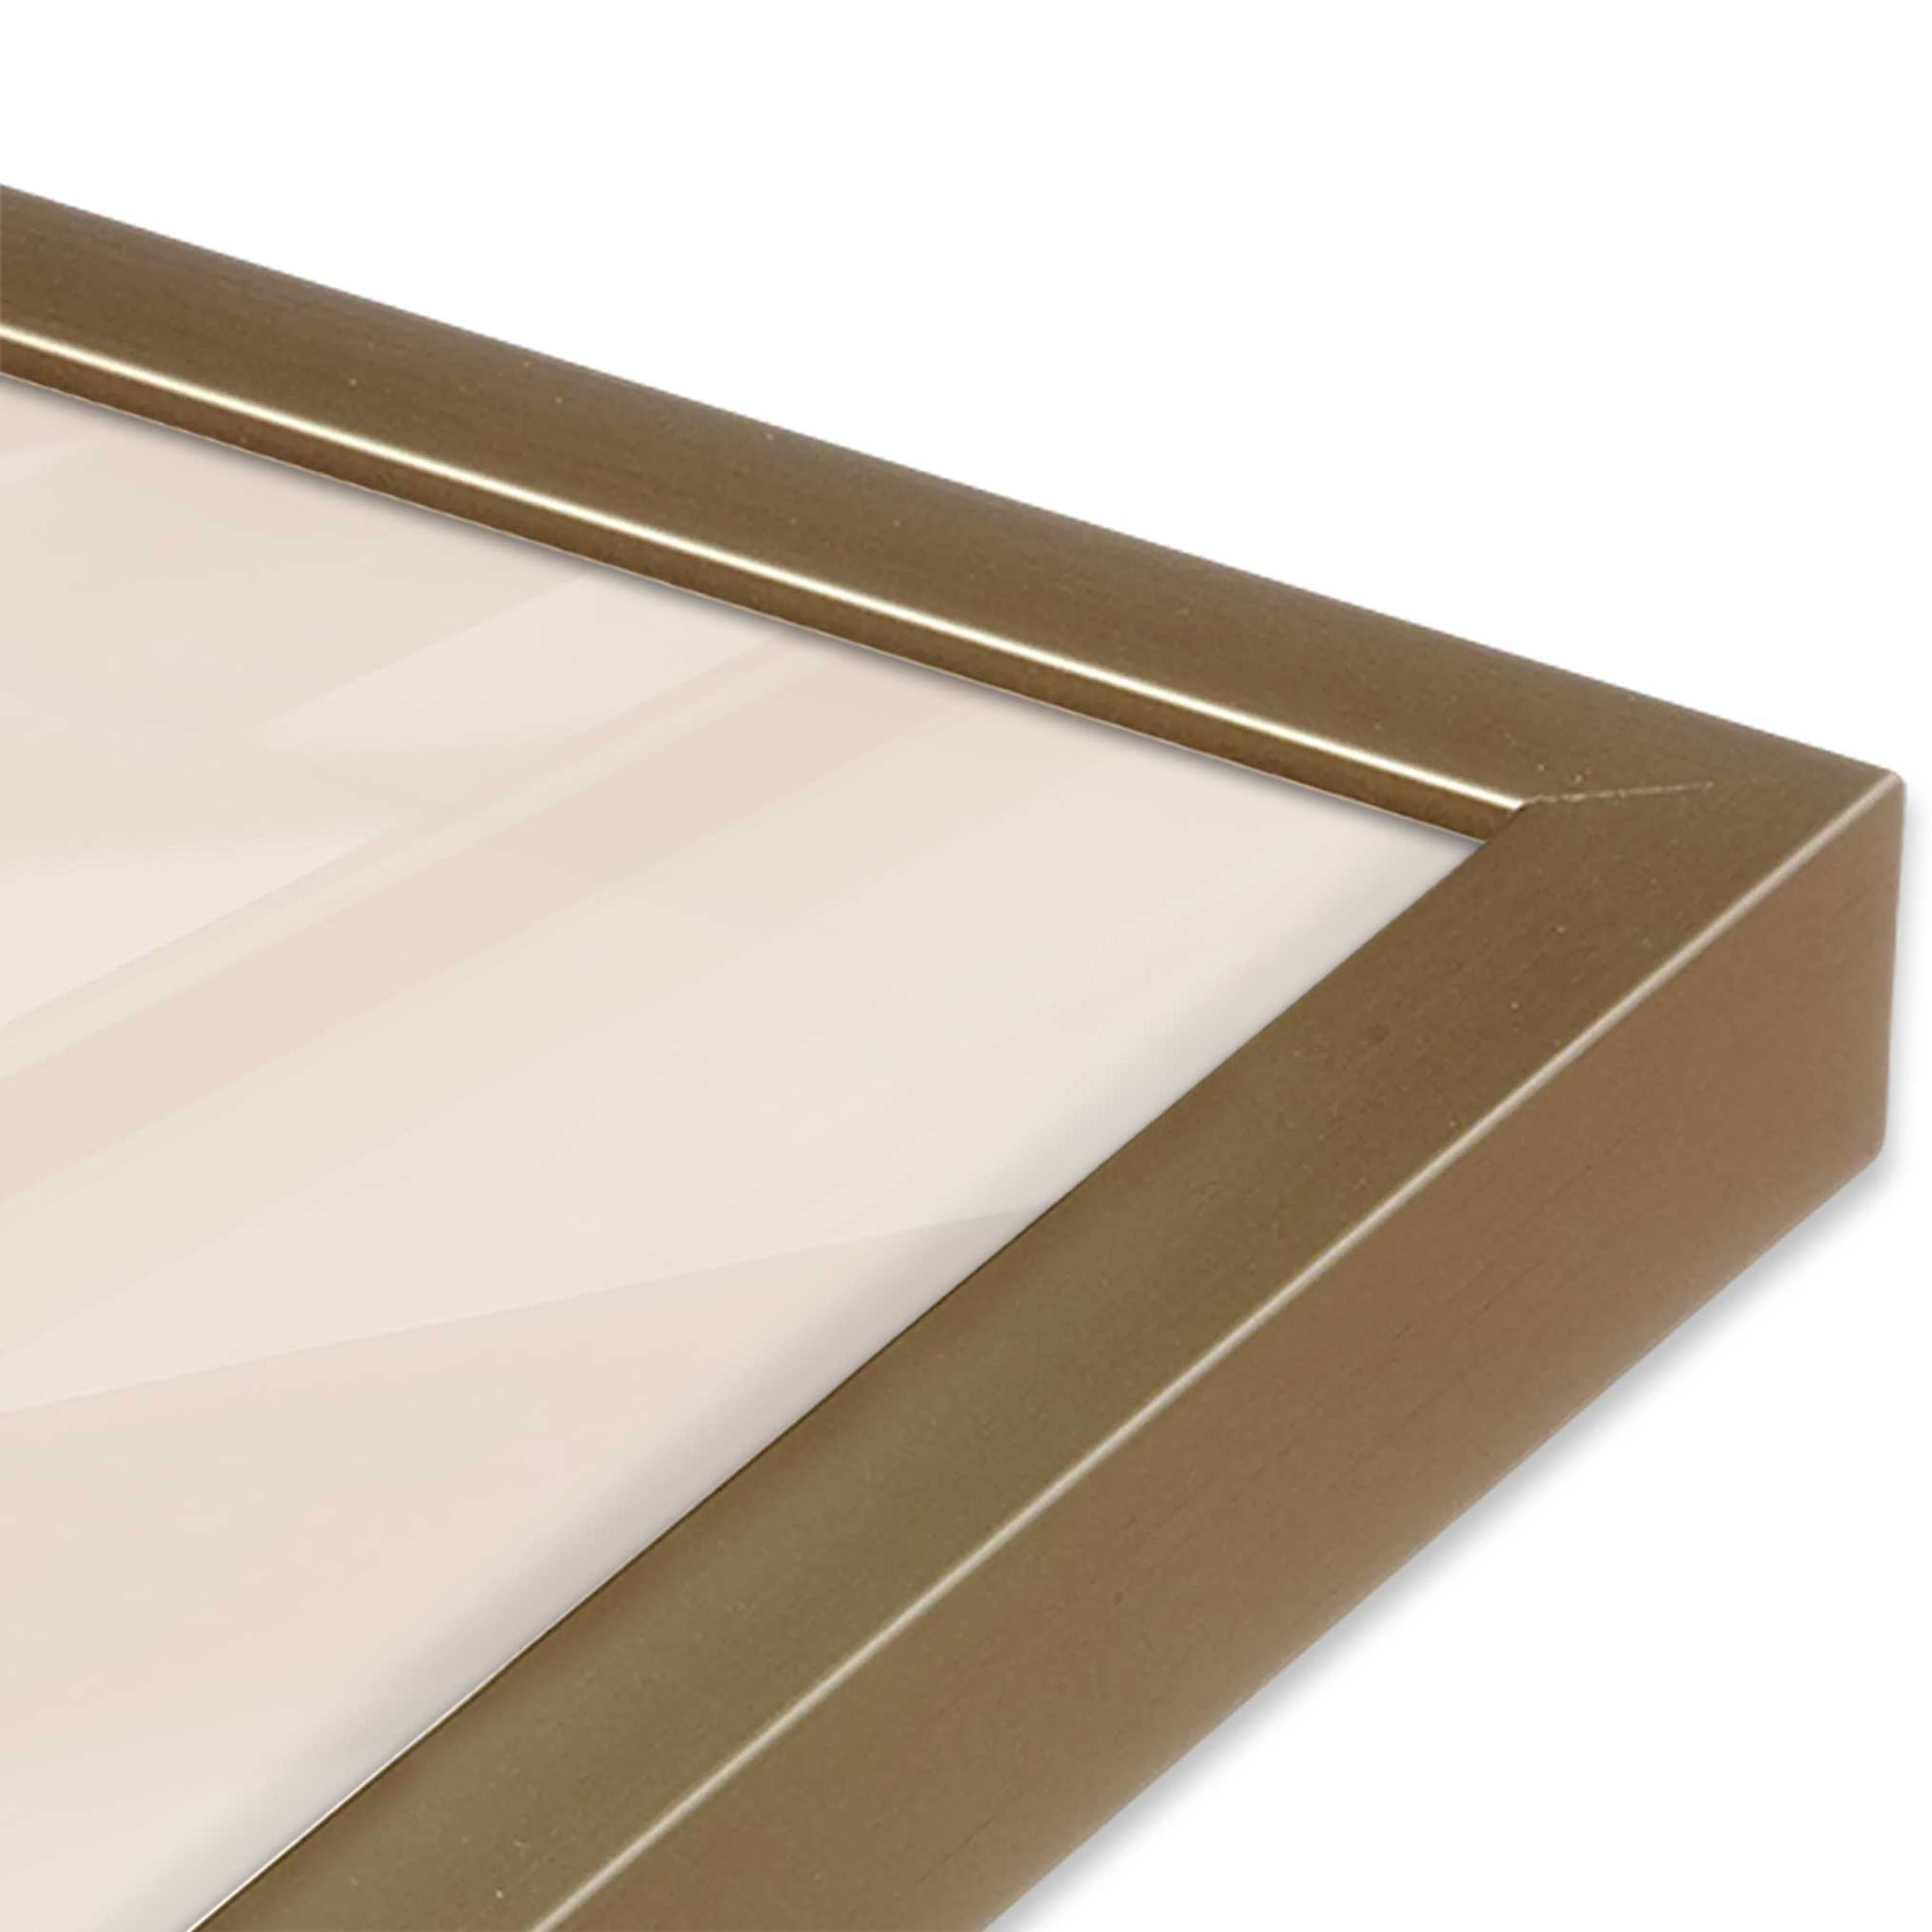 [Color:Brushed Gold] Picture of art in a Brushed Gold frame of the corner